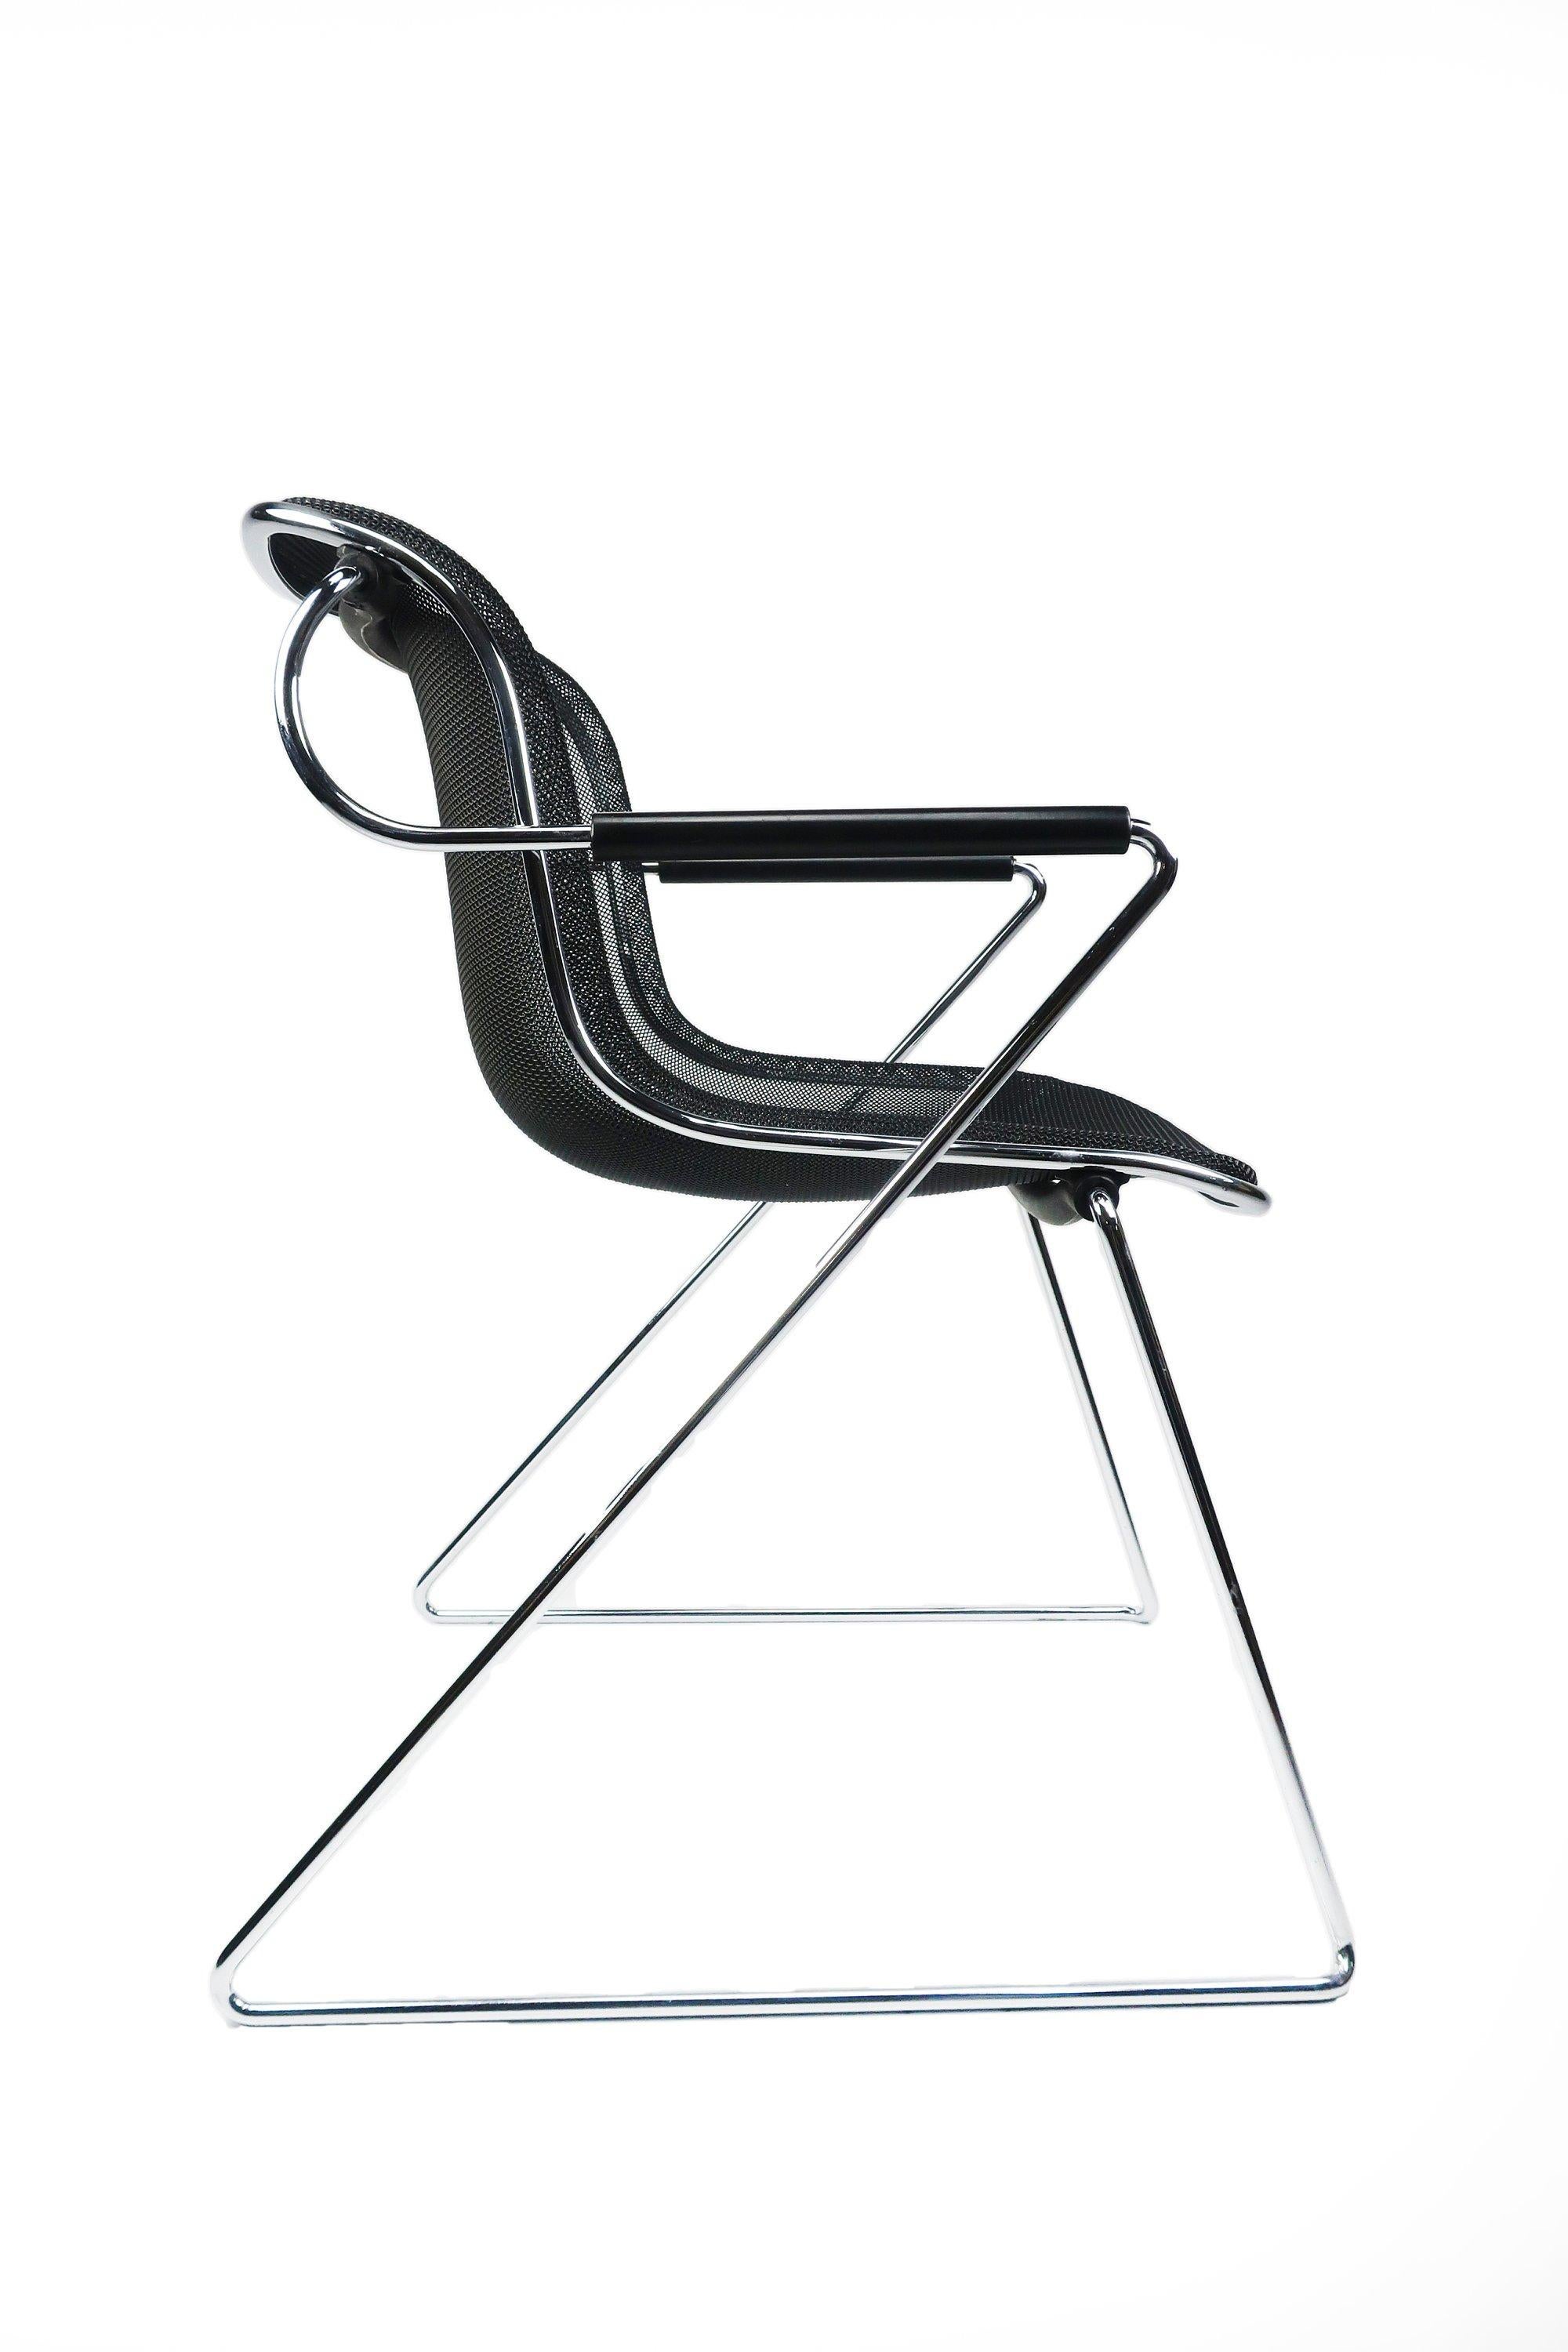 Set of five Penelope chairs designed by Charles Pollock for Castelli (1982). Constructed of chrome plated steel arms and legs with a resin-coated woven steel wire sled seat.  This design classic is comfortable, has a beautiful silhouette, and stacks